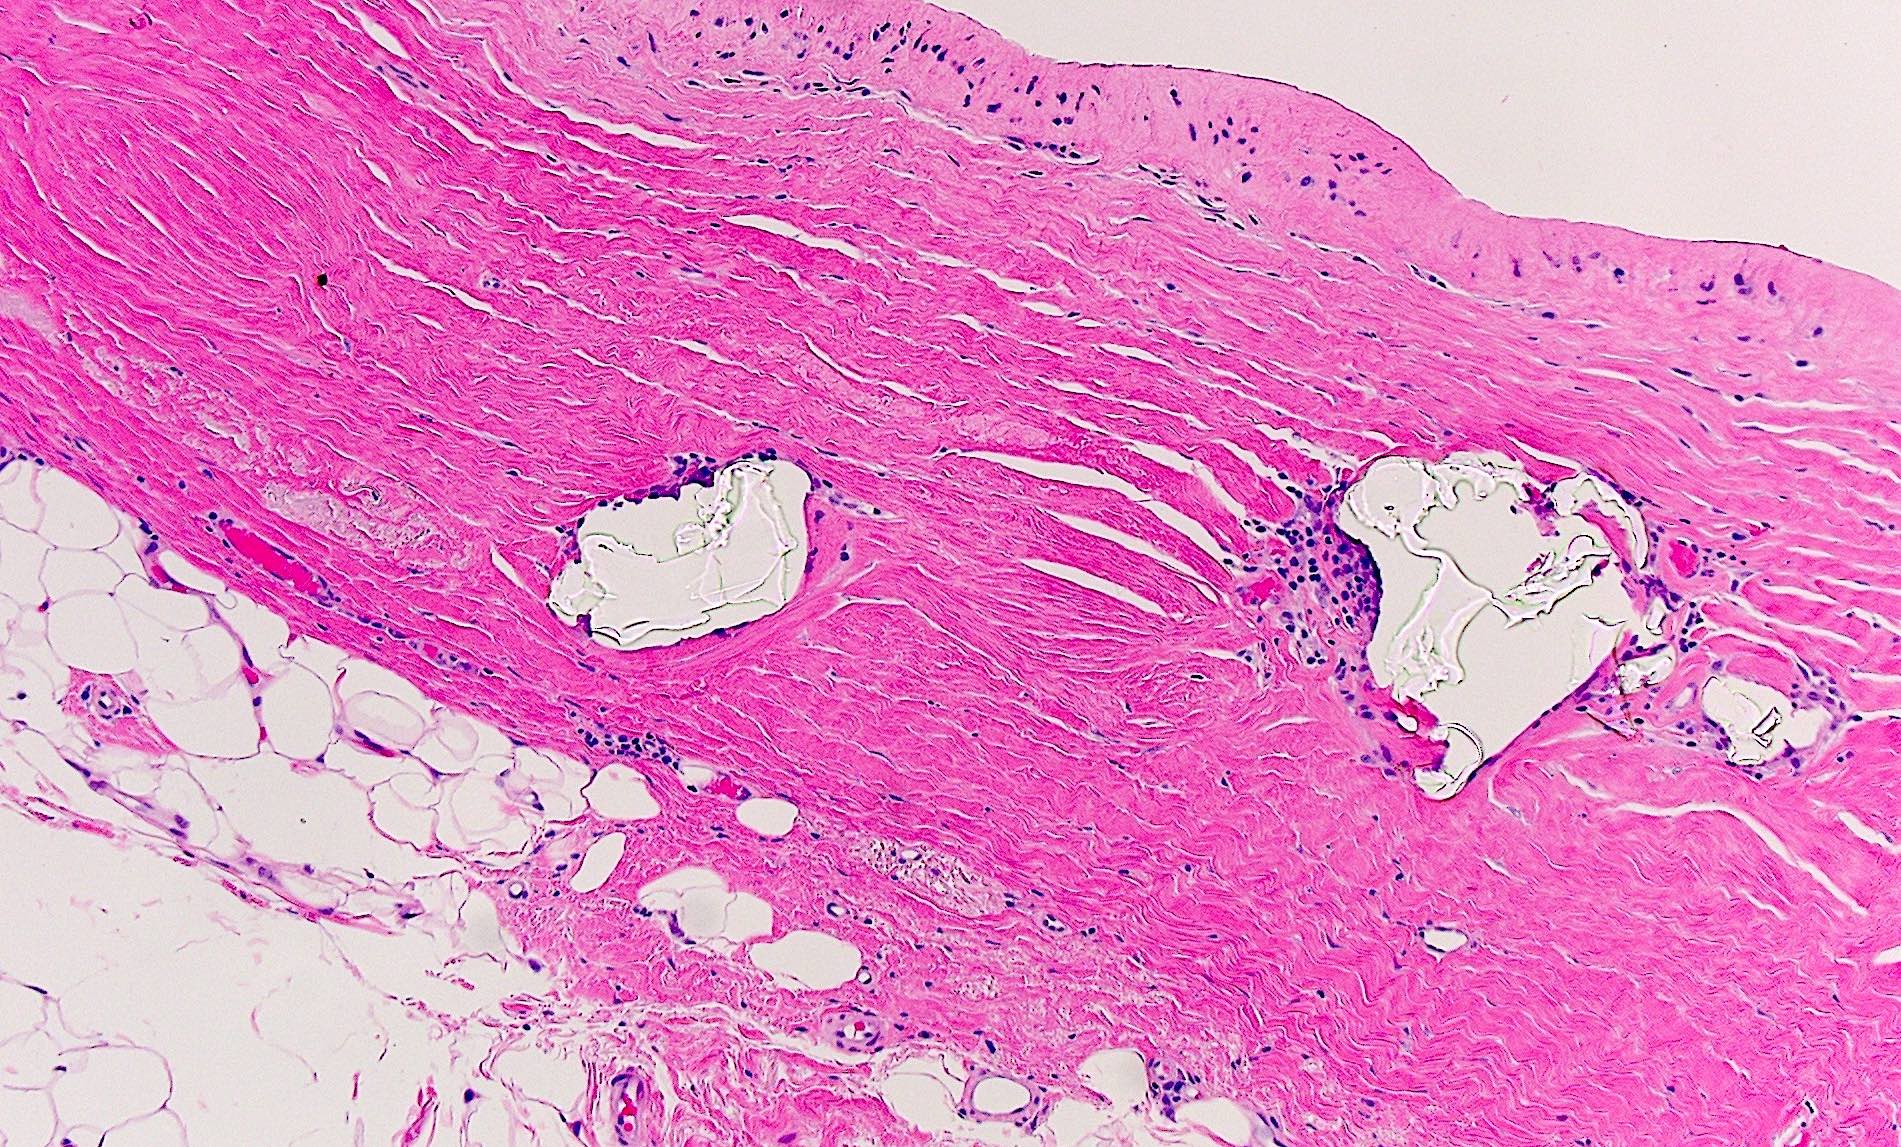 Silicone and synovial metaplasia